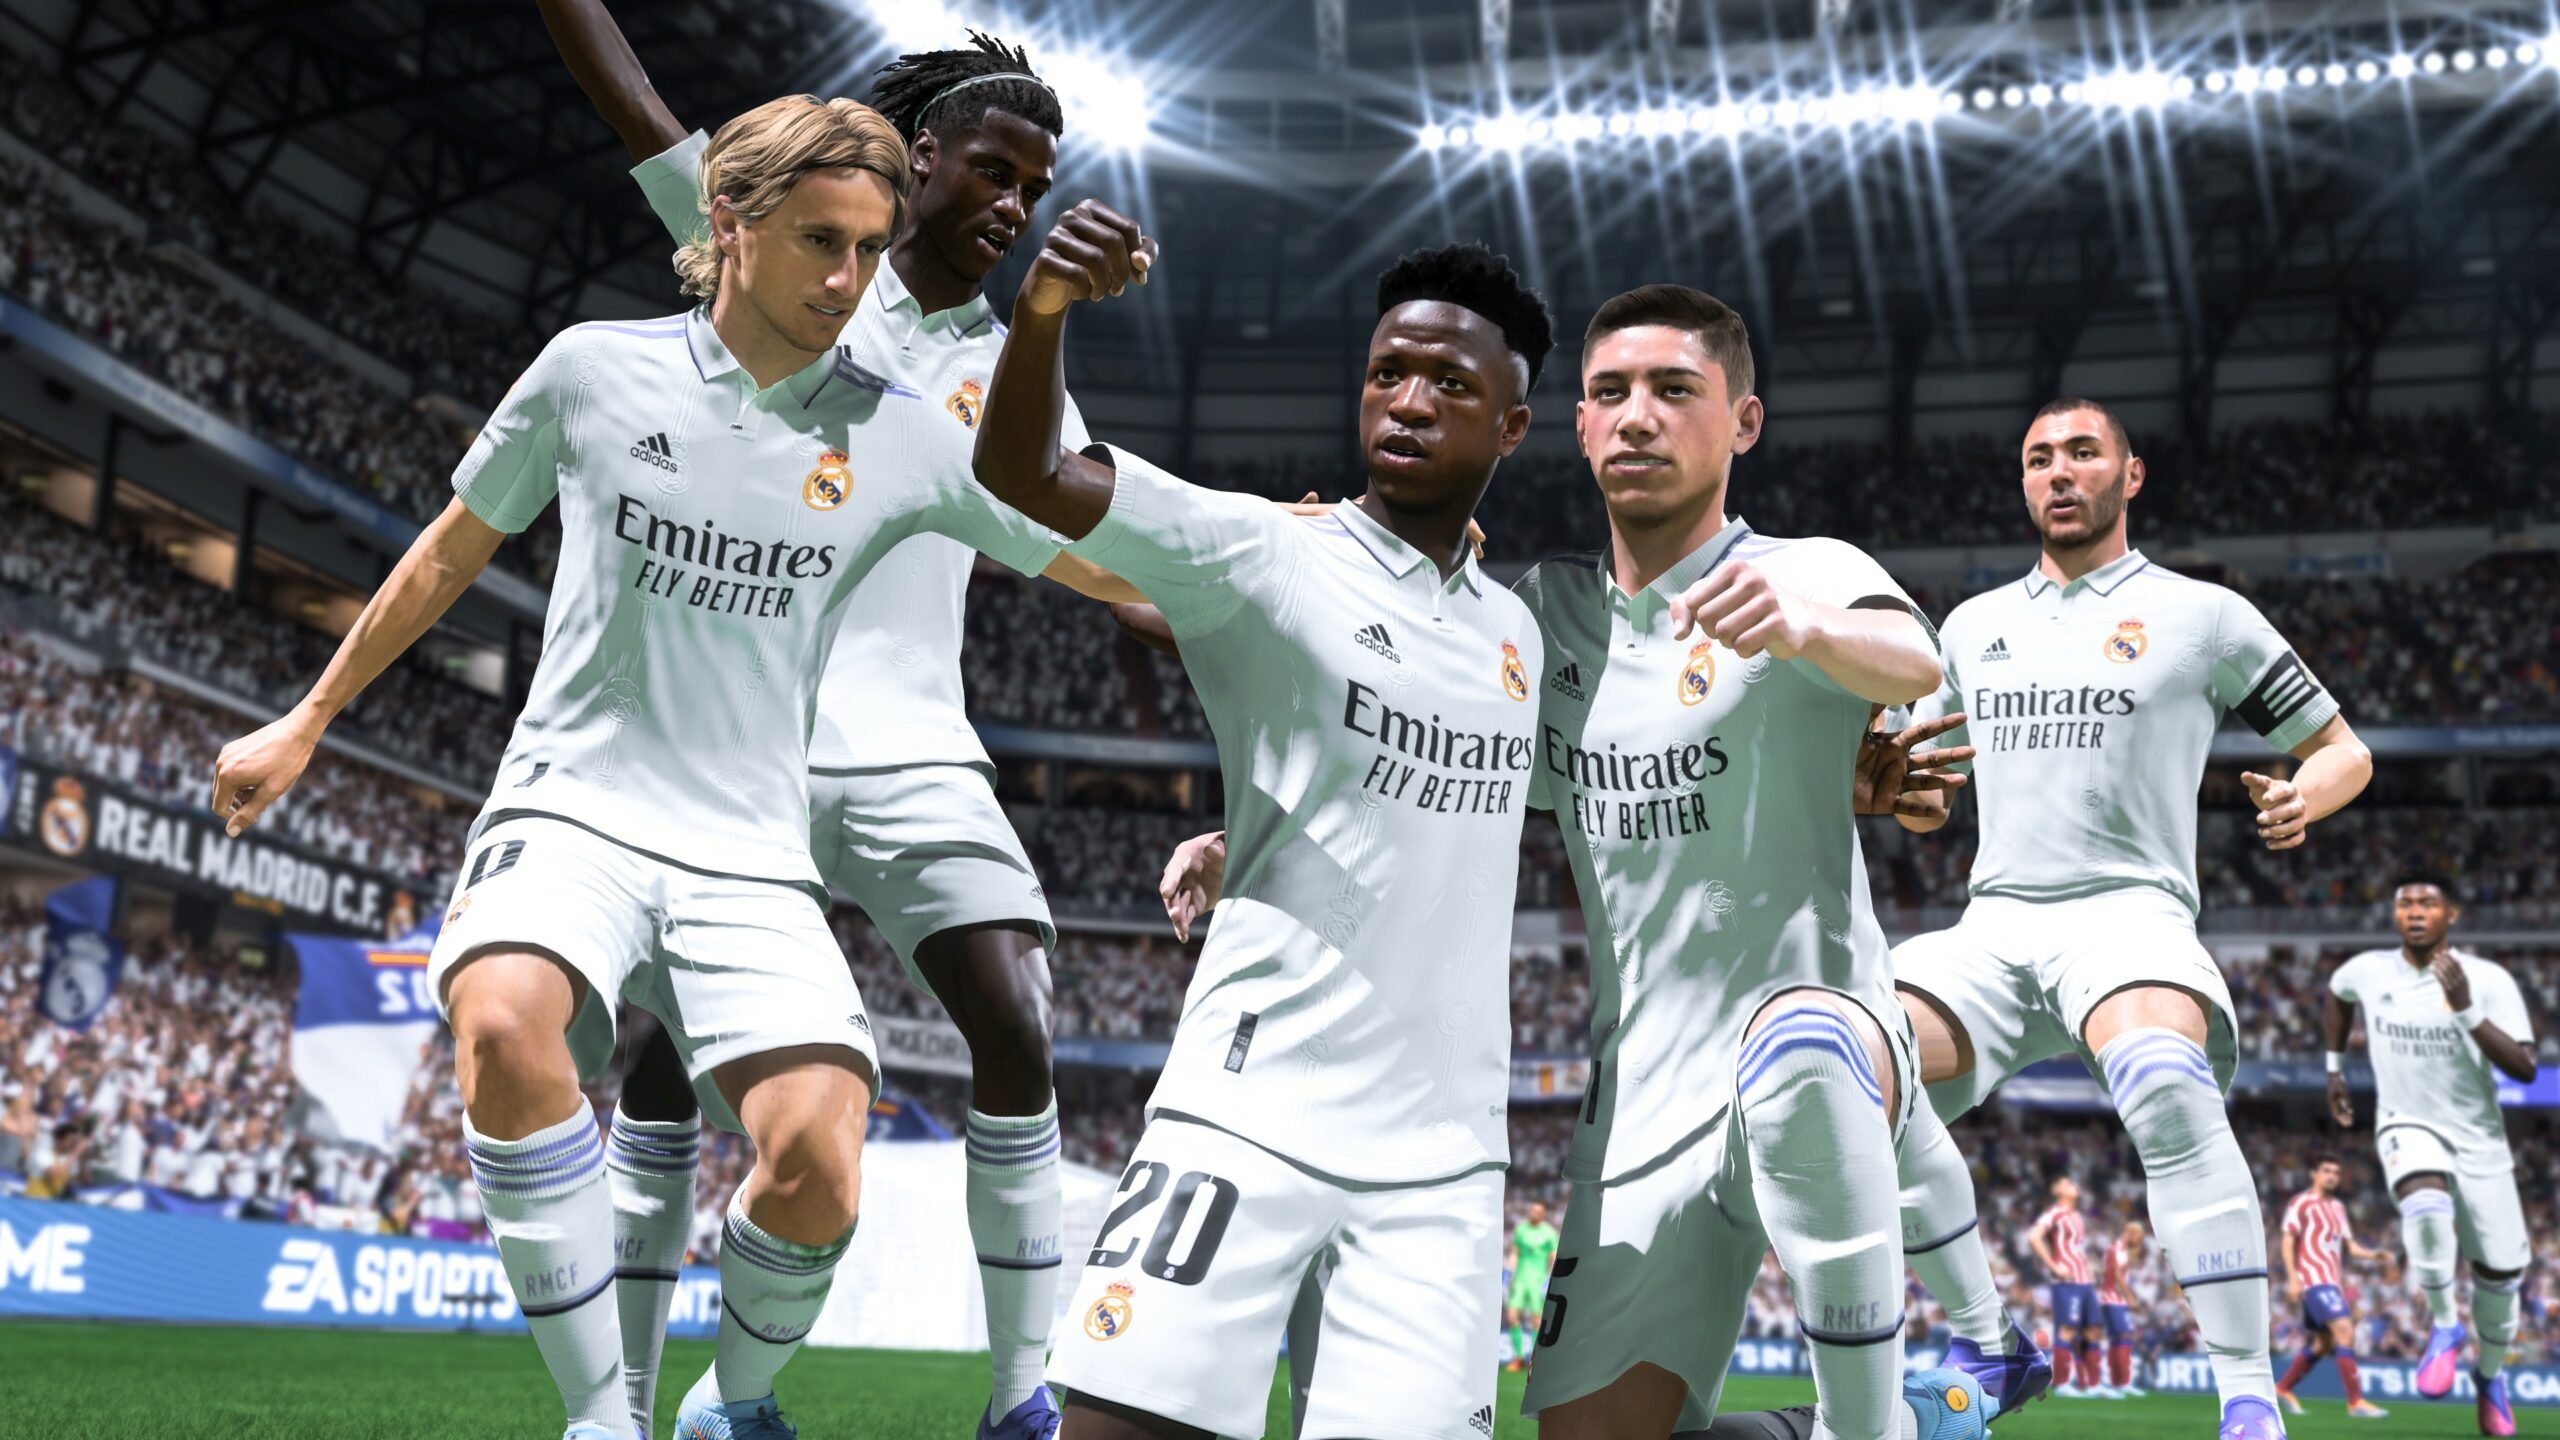 FIFA 23 - BEST CONTROLLER SETTINGS UPDATE TO USE TO GIVE YOU AN  ADVANTAGE/MORE WINS (TUTORIAL) 